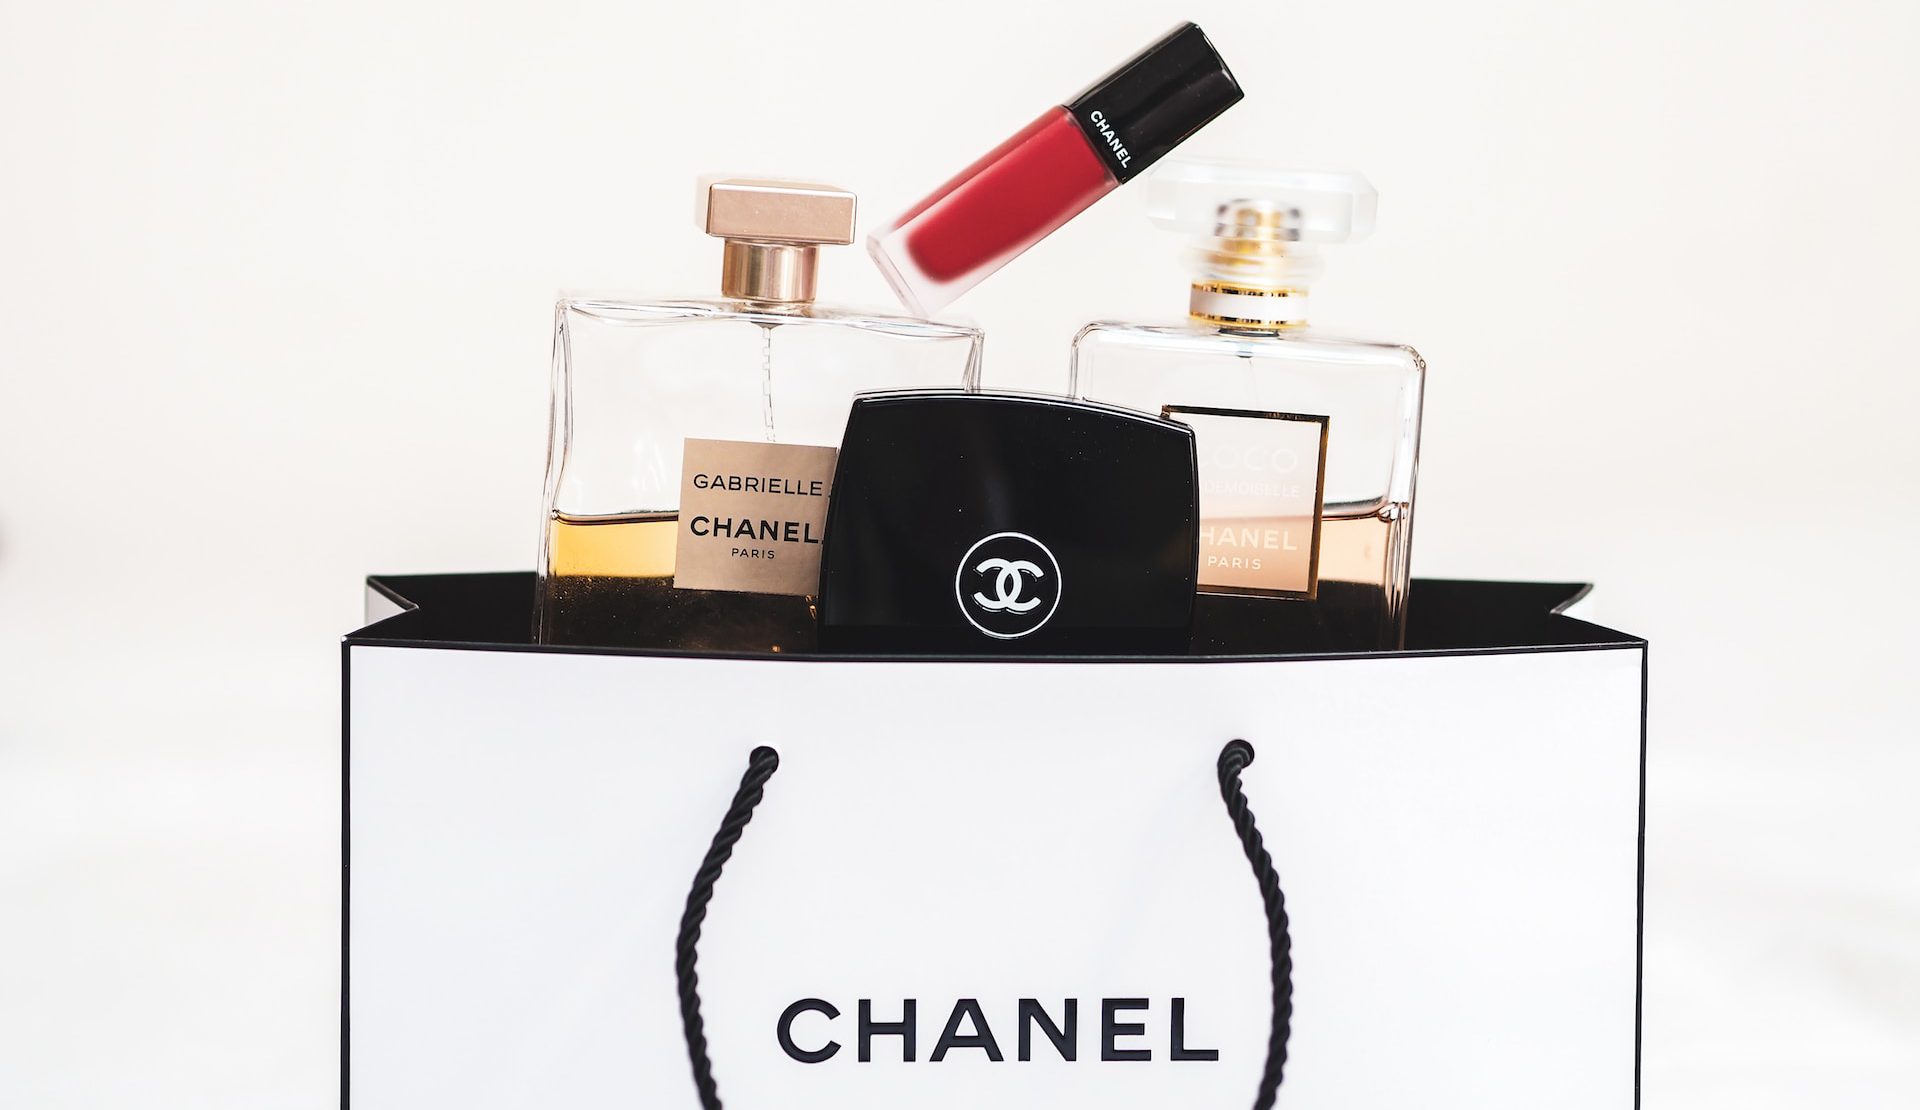 Chanel perofumes in a shopping bag